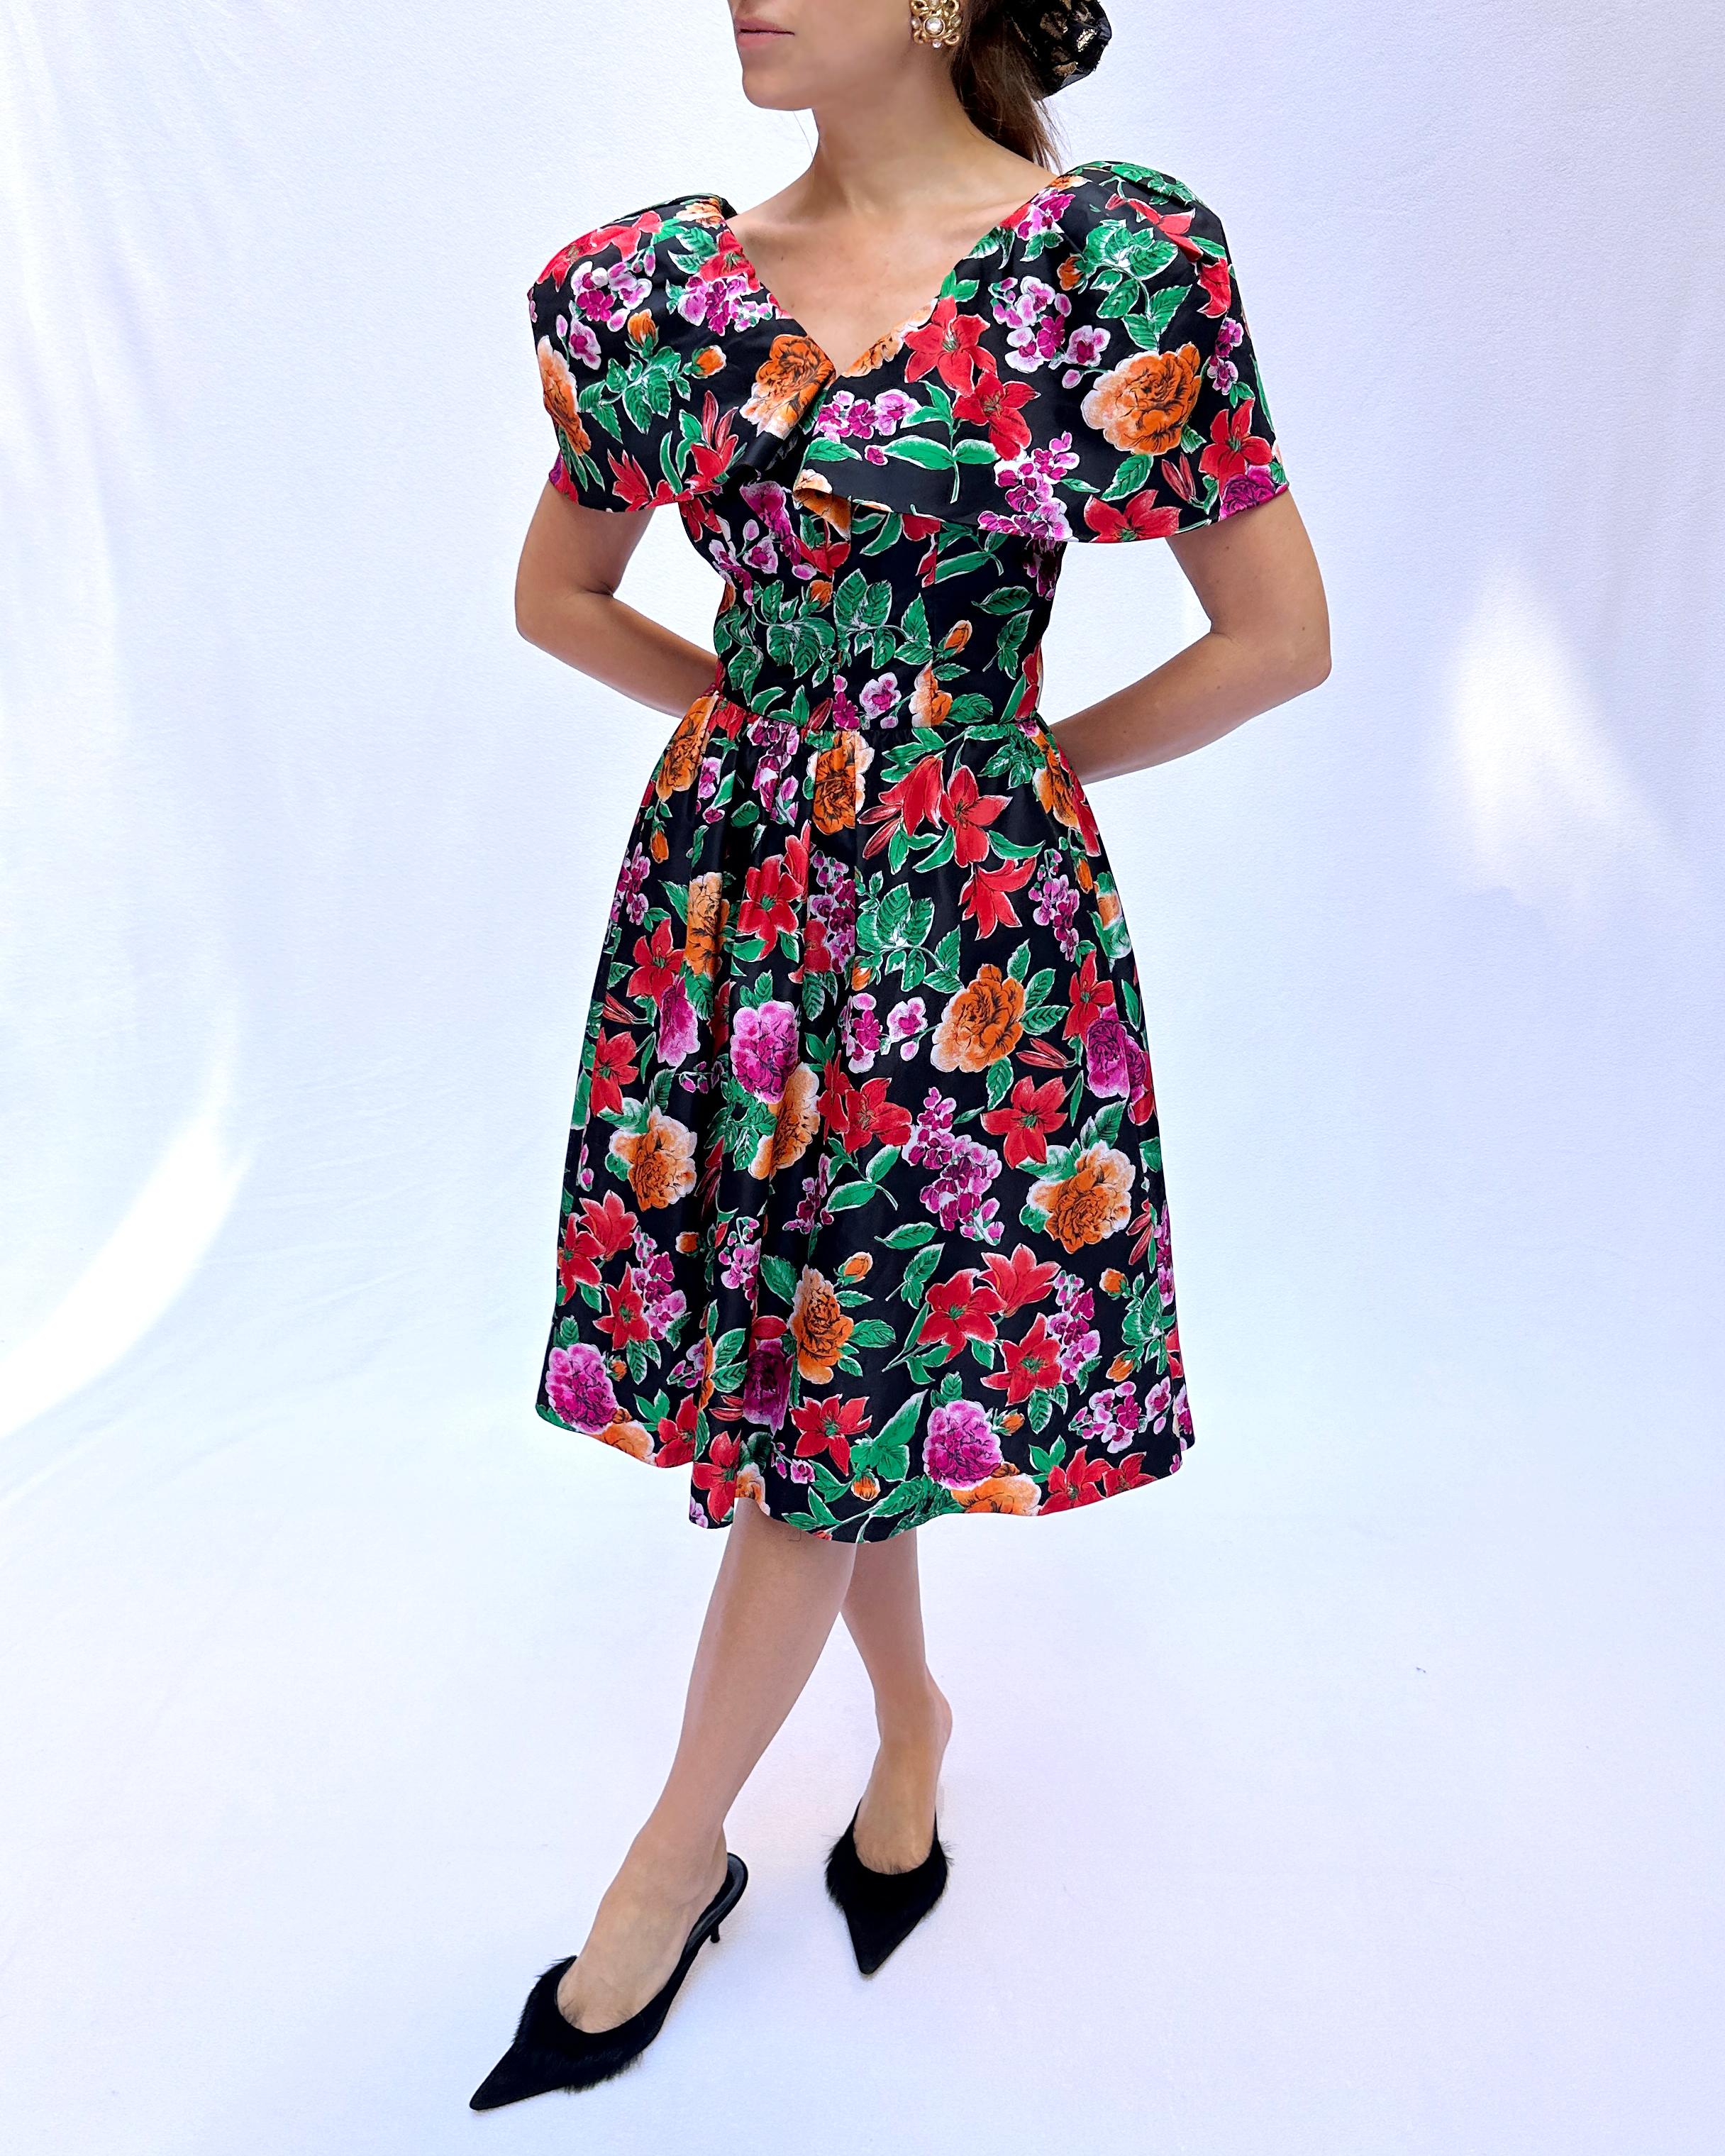 This vintage 1980s floral party dress is pure feminine fun. The black background on this floral print is my preferred way to wear florals in the cold-weather months. Classic 1980s puff shoulders take on a new shape with this cape neckline, bolstered